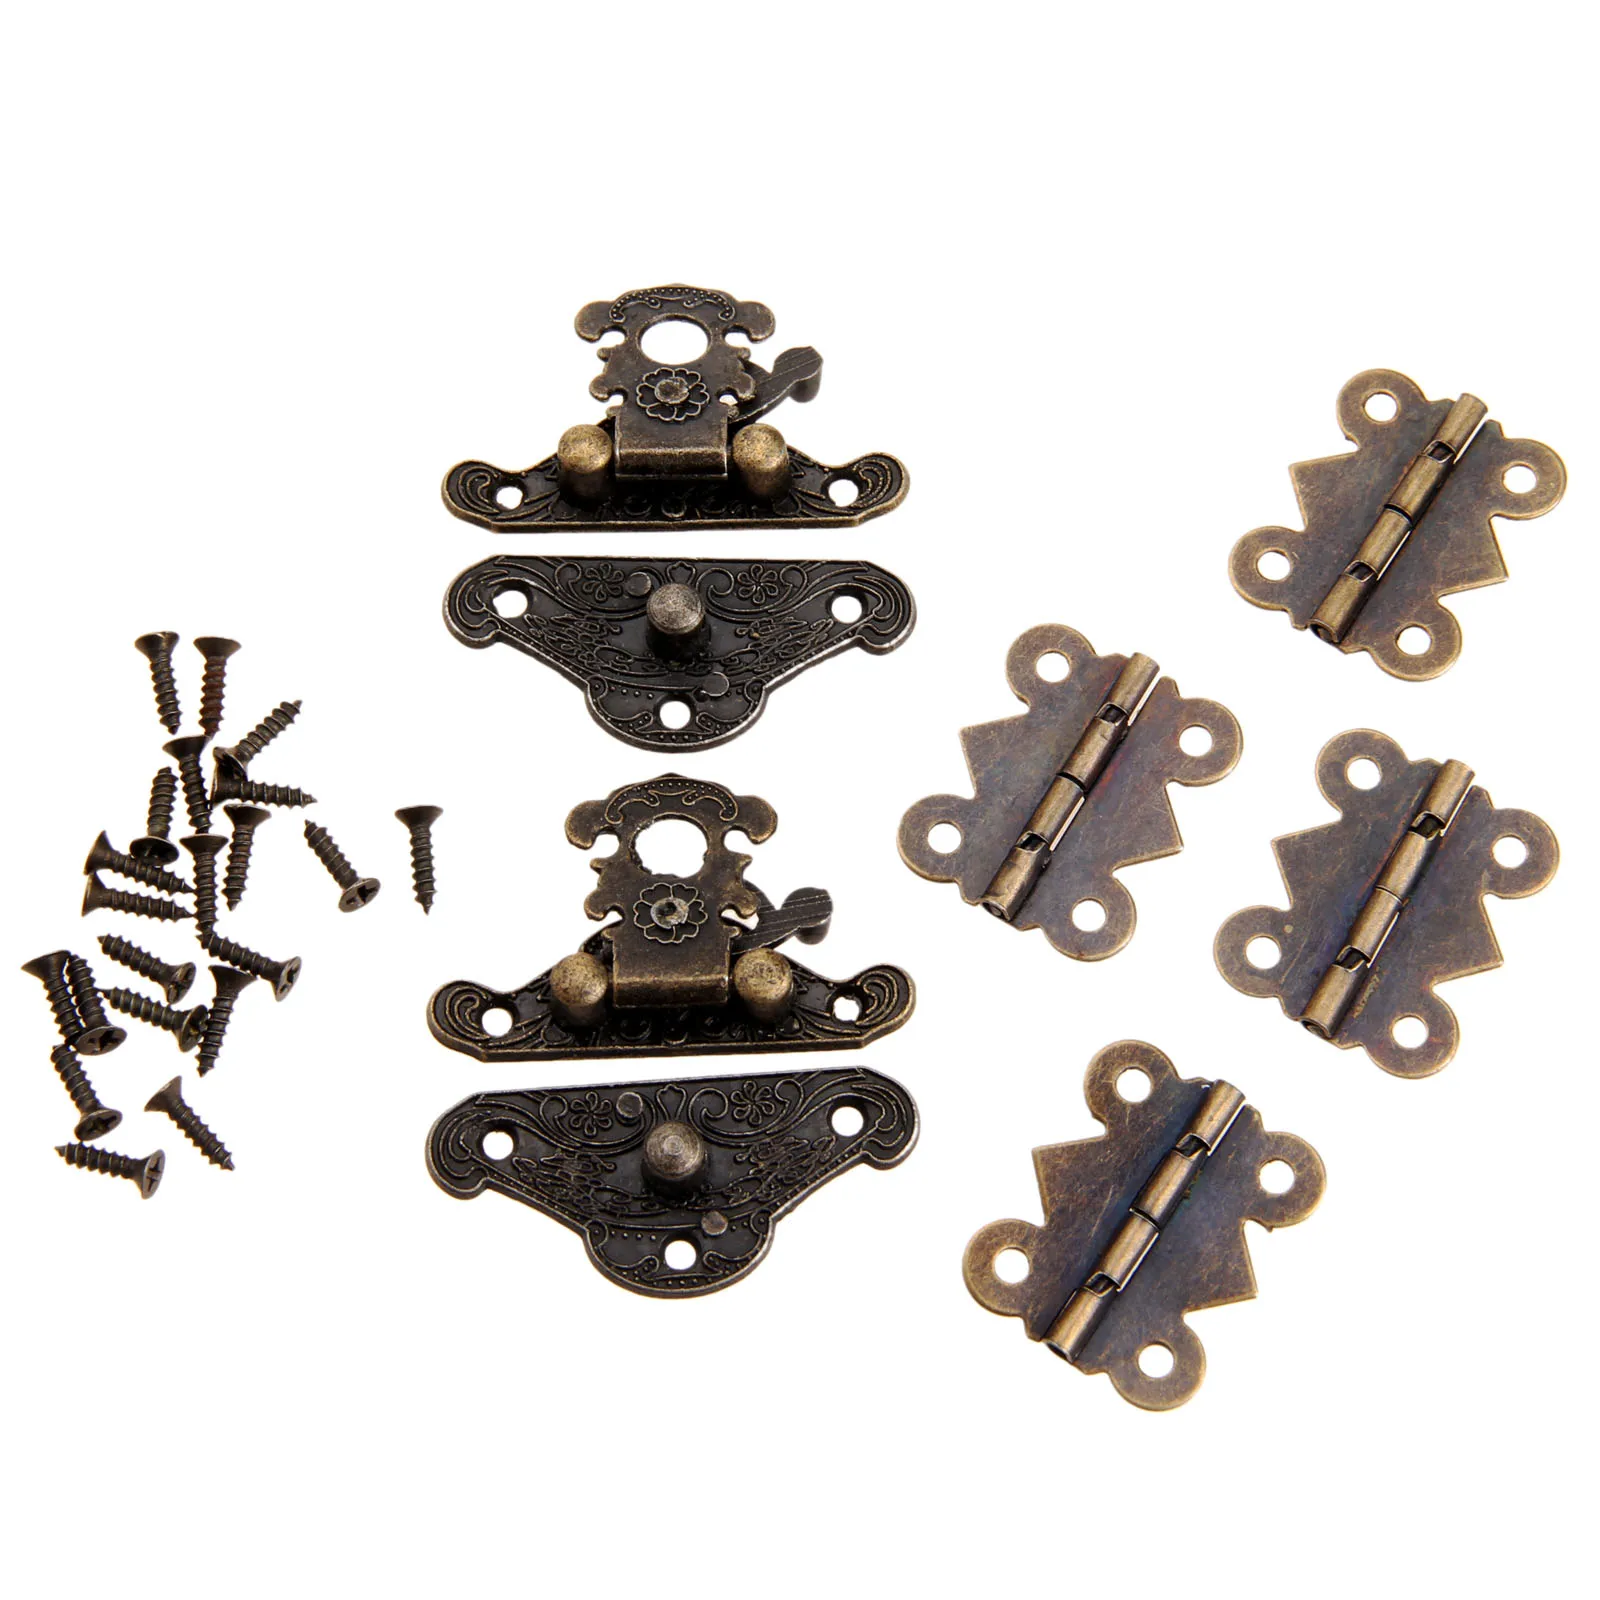 

4Pcs Antique Bronze Cabinet Hinges with 2Pcs Jewelry Wooden Box Case Toggle Hasp Latch Lox Iron Vintage Furniture Hardware